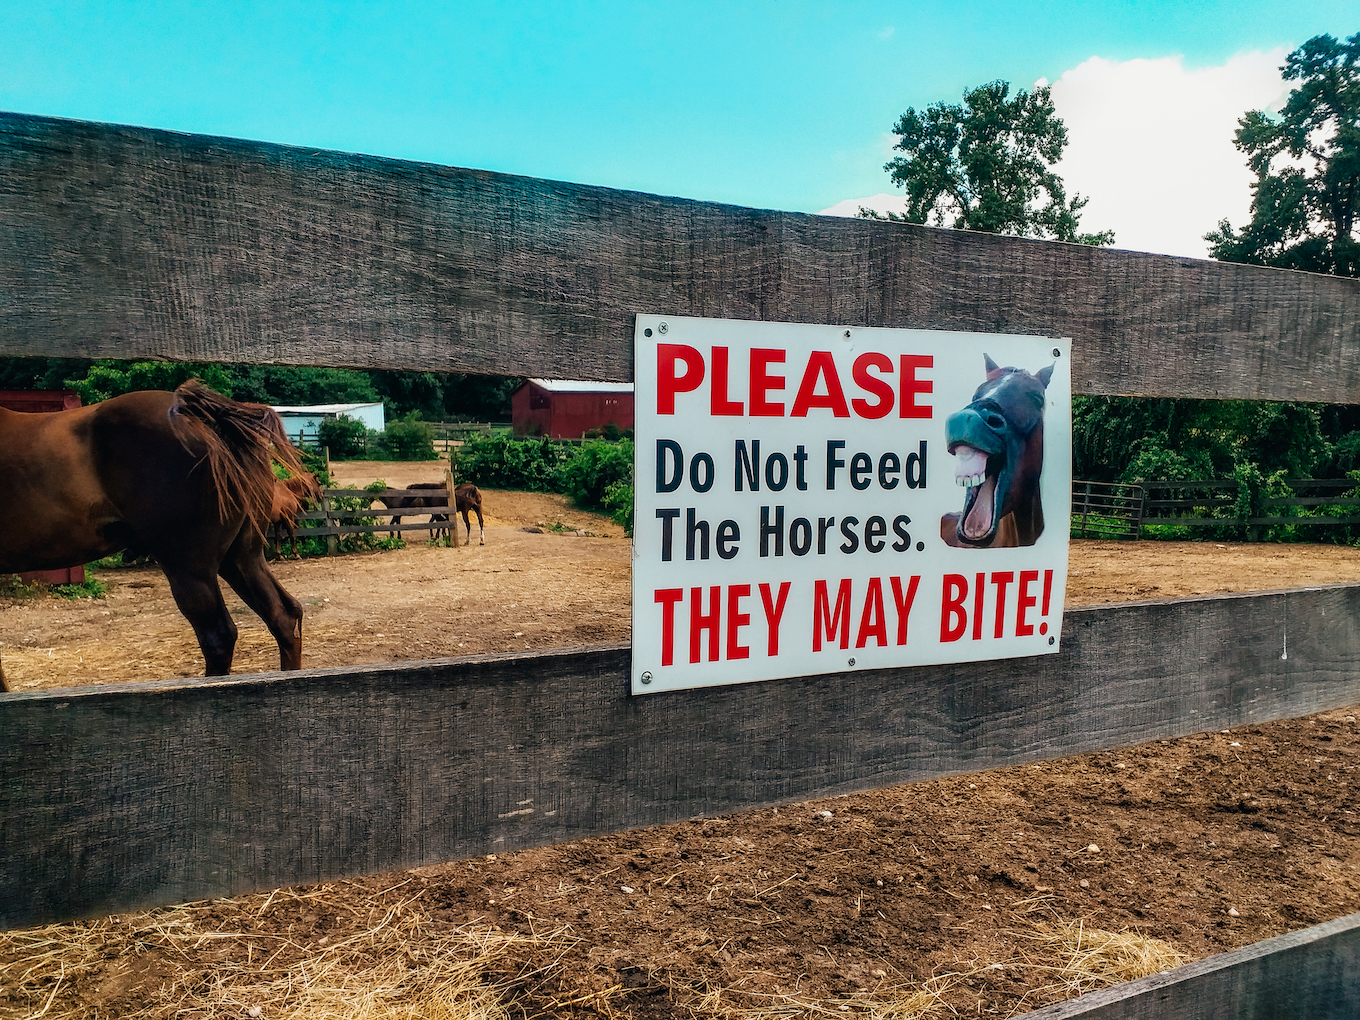 A Piscataway Farm sign warns riders not to feed the horses as they may bite